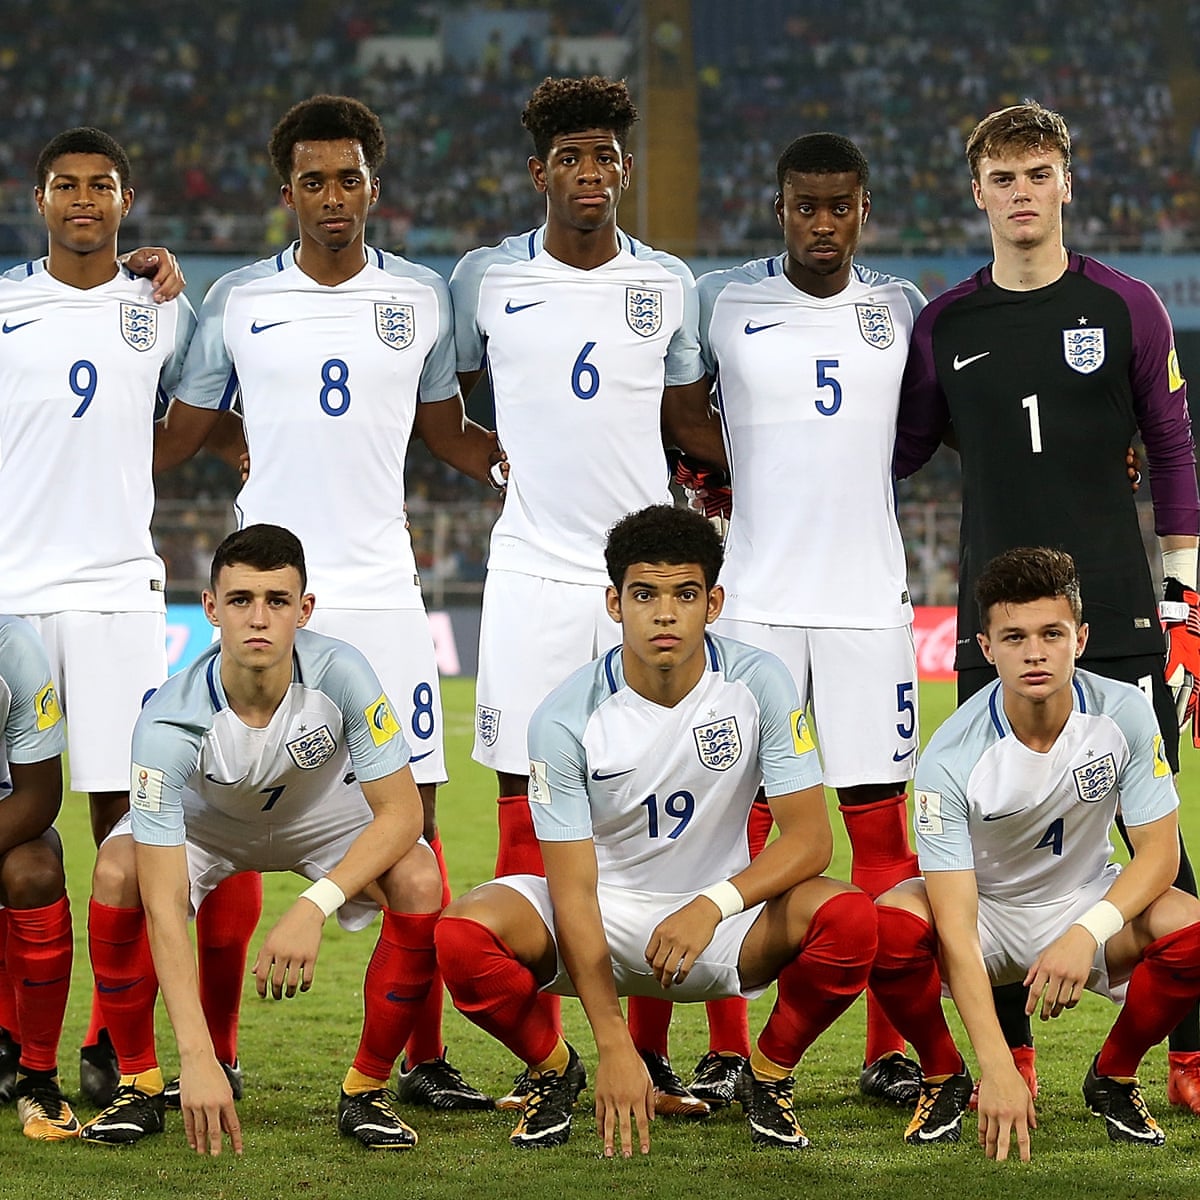 Missing Invest Extraordinary Meet the England players who have reached the under-17 World Cup final |  England | The Guardian